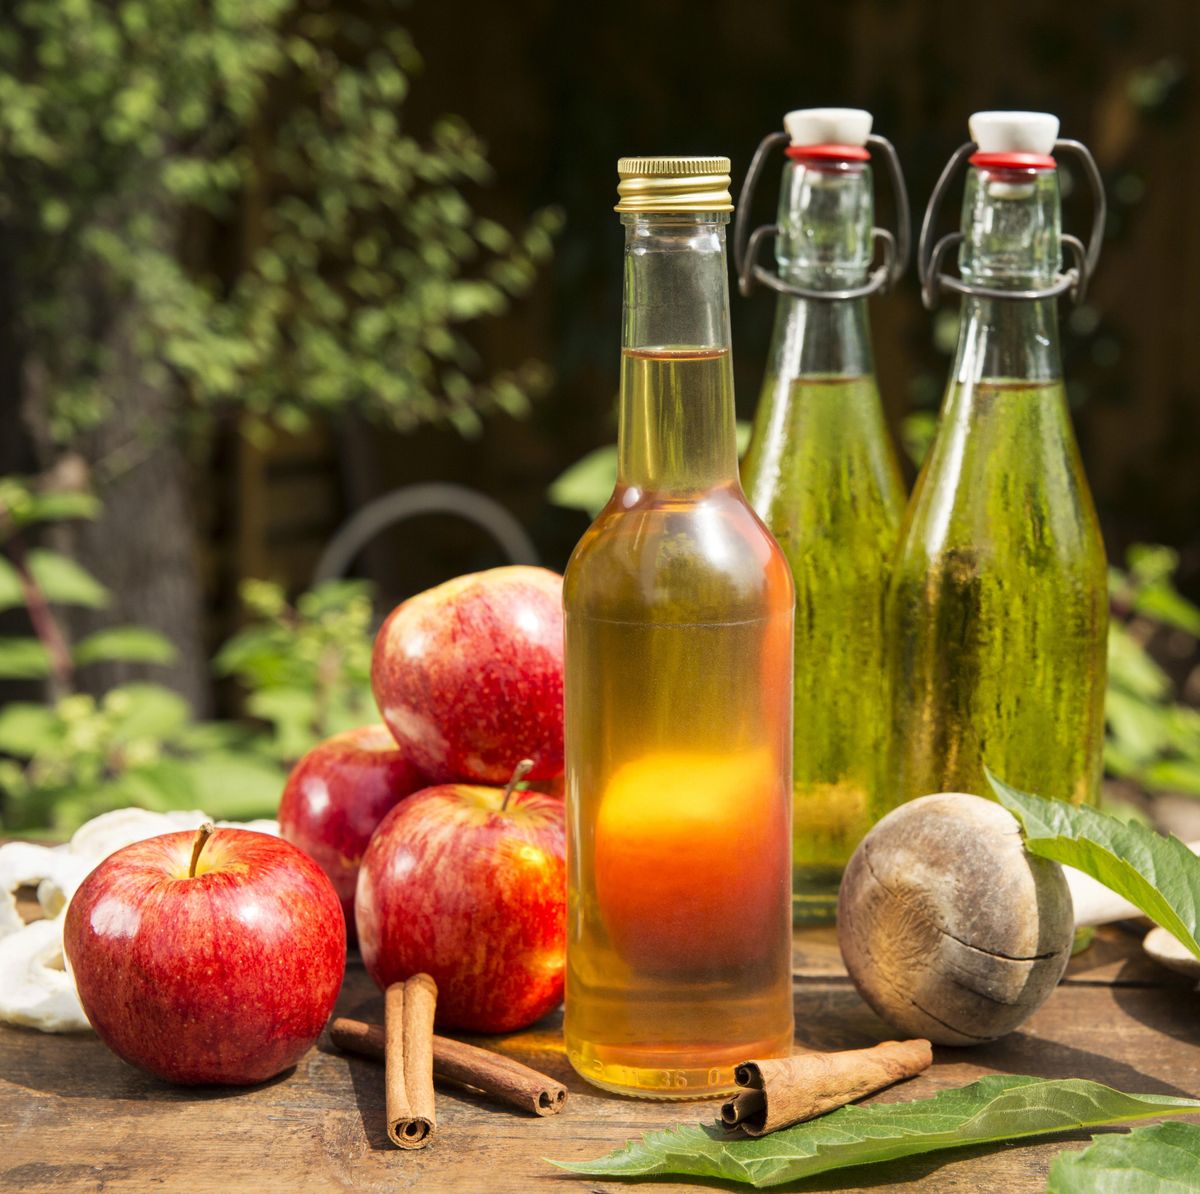 The Benefits Of Apple Cider Vinegar - Is ACV Healthy Or Not?